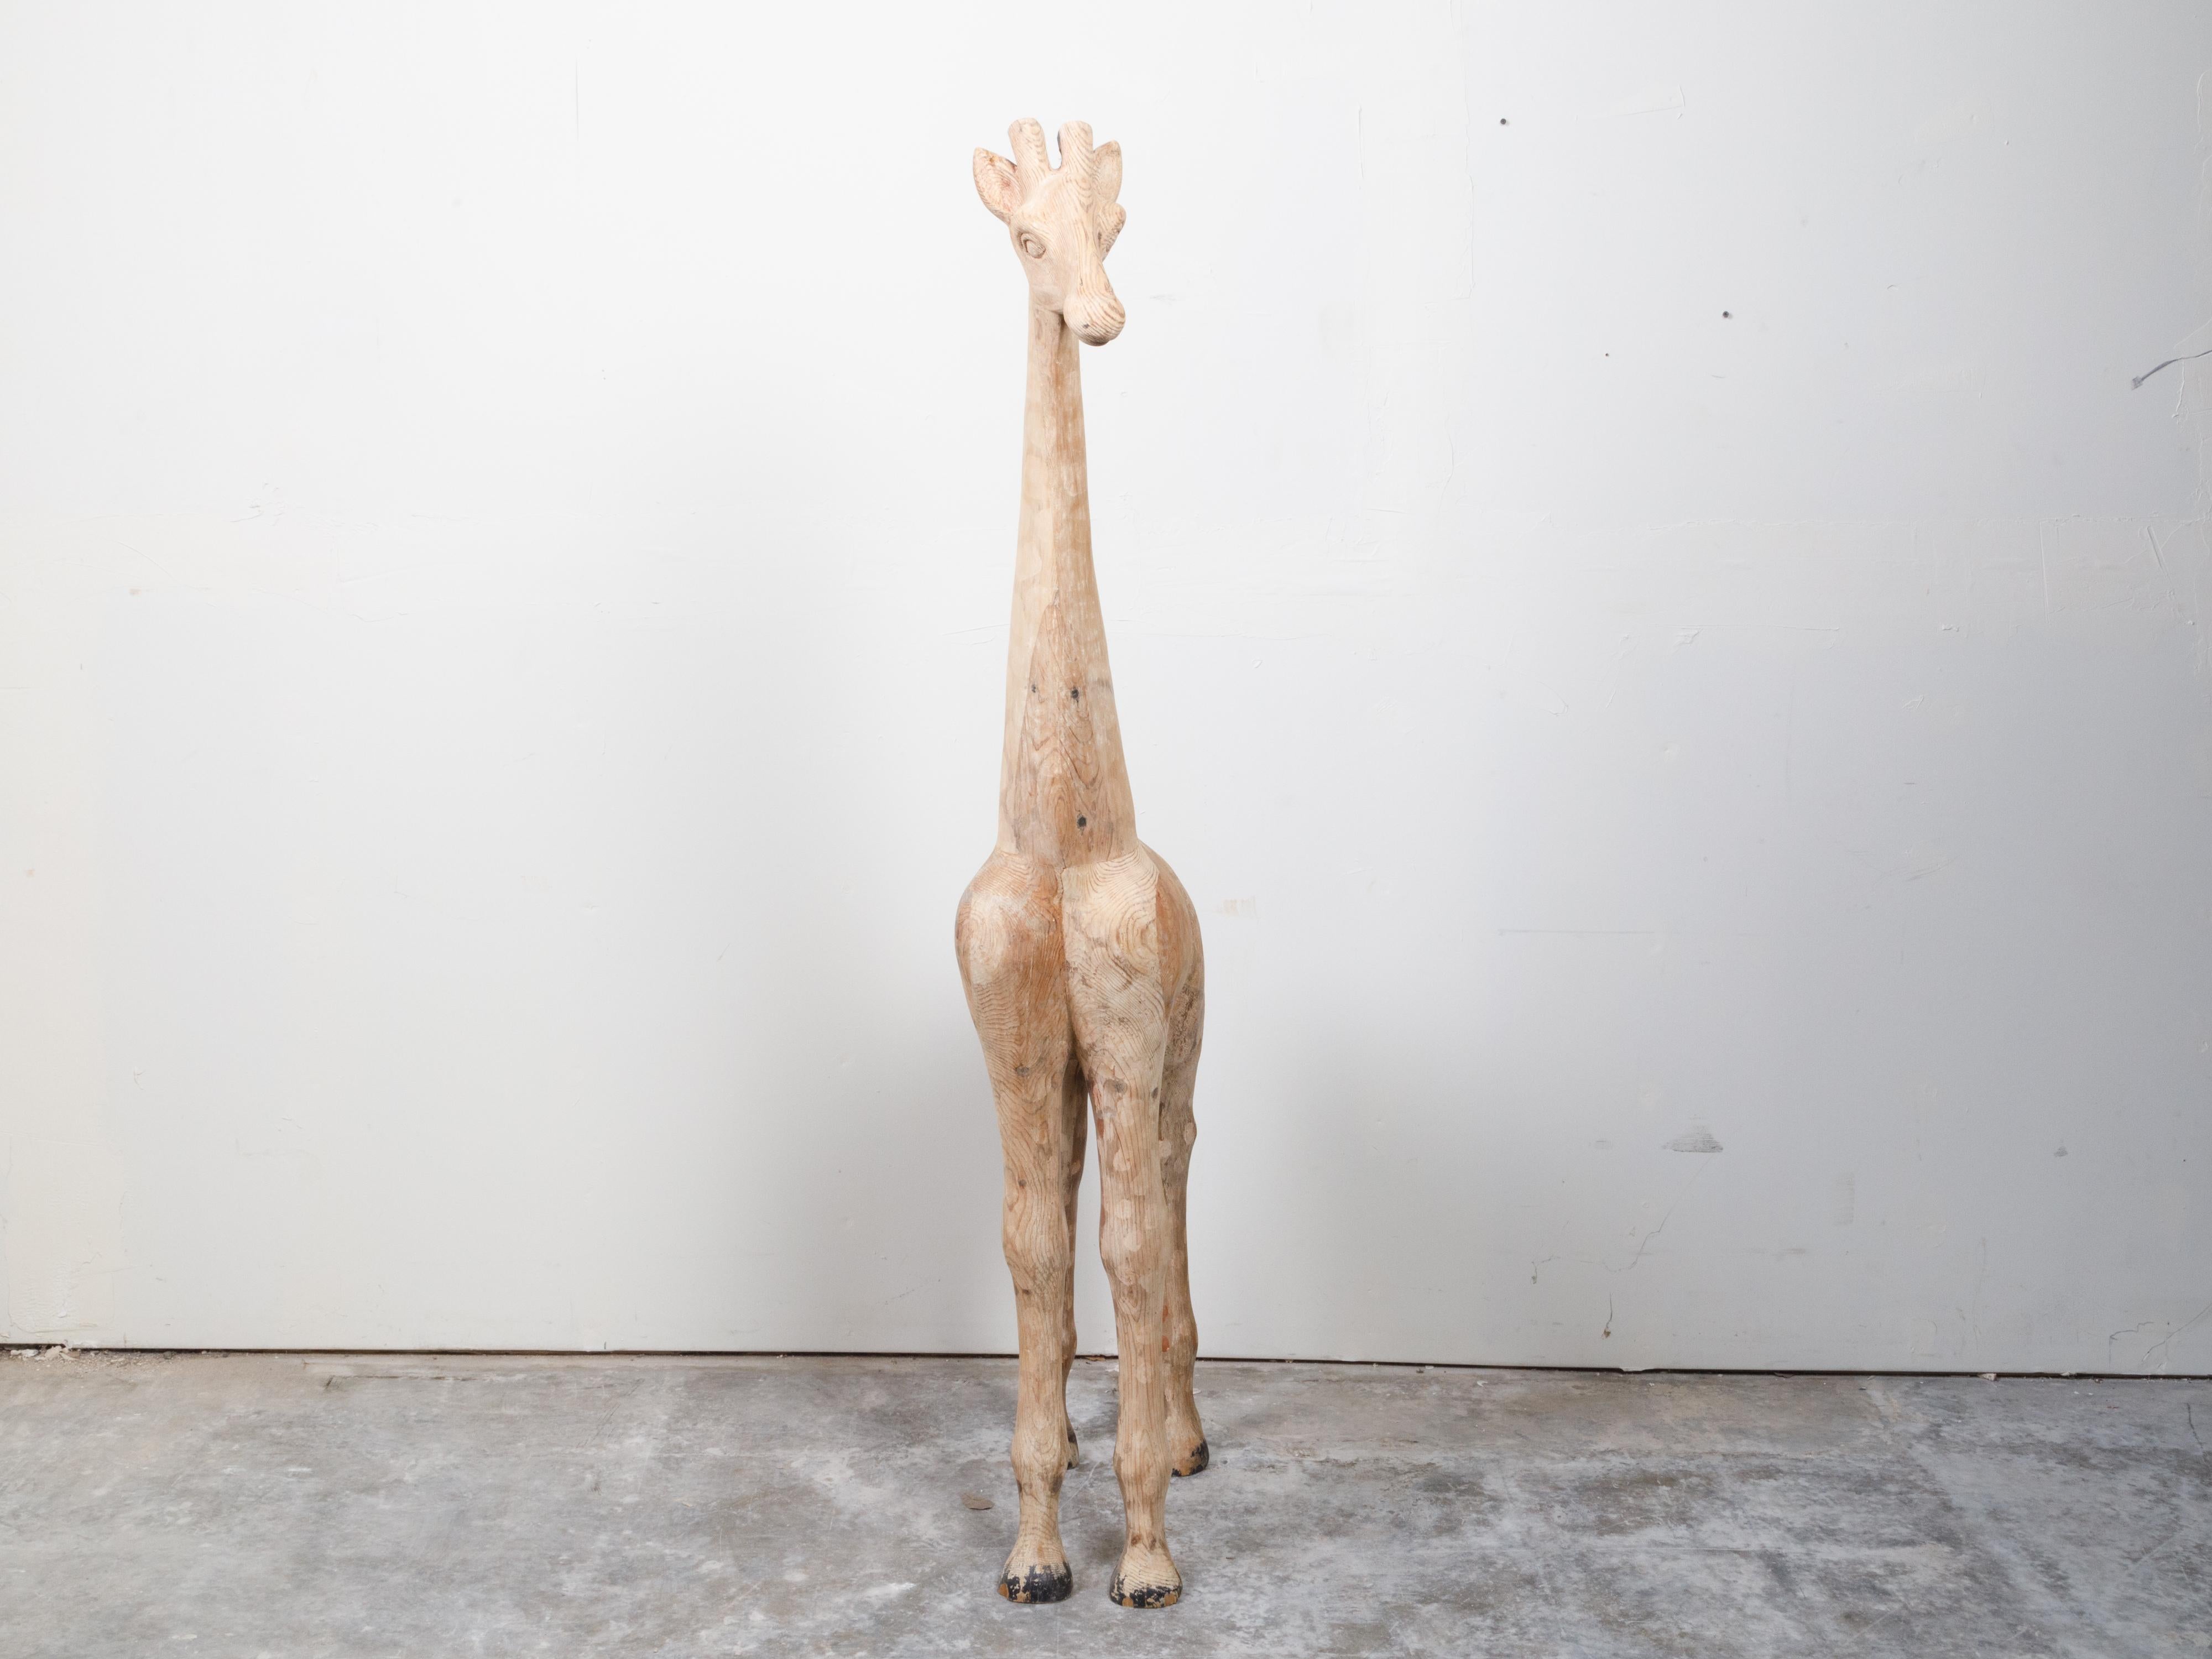 A vintage American carved wooden giraffe sculpture from the mid 20th century, with spotted touches. Made in the USA during the midcentury period, this wooden sculpture captures our attention with its lovely depiction of a giraffe standing firmly on